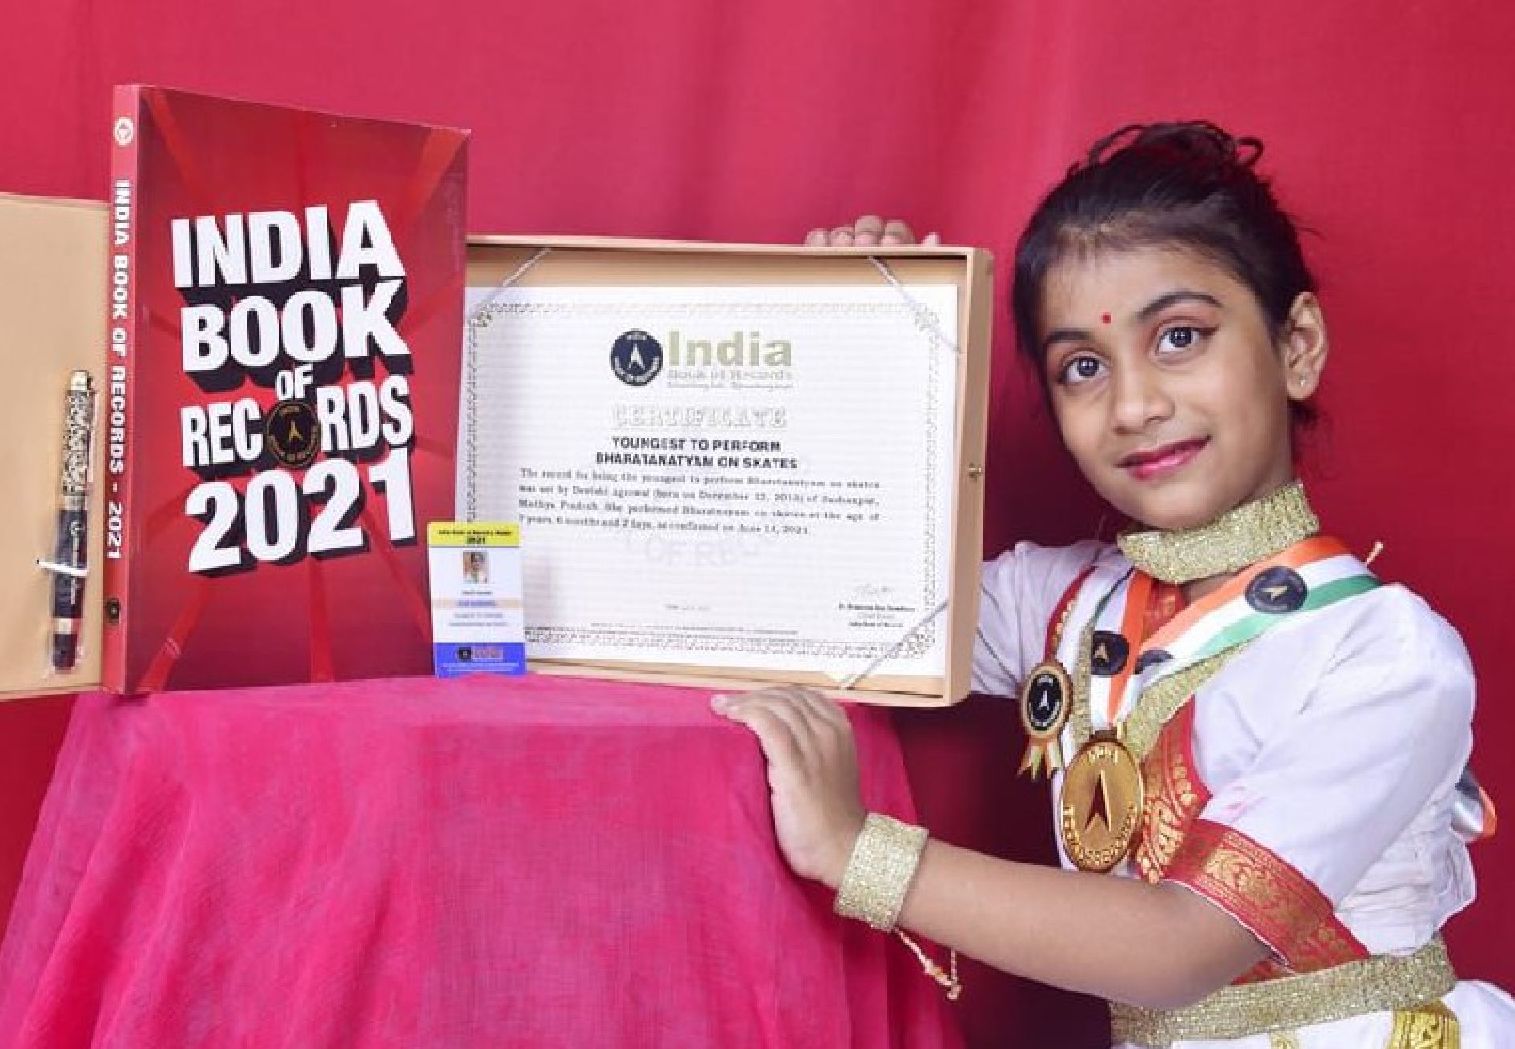 Video: Burhanpur's daughter entered India Book of Records by doing Bharatanatyam Skating